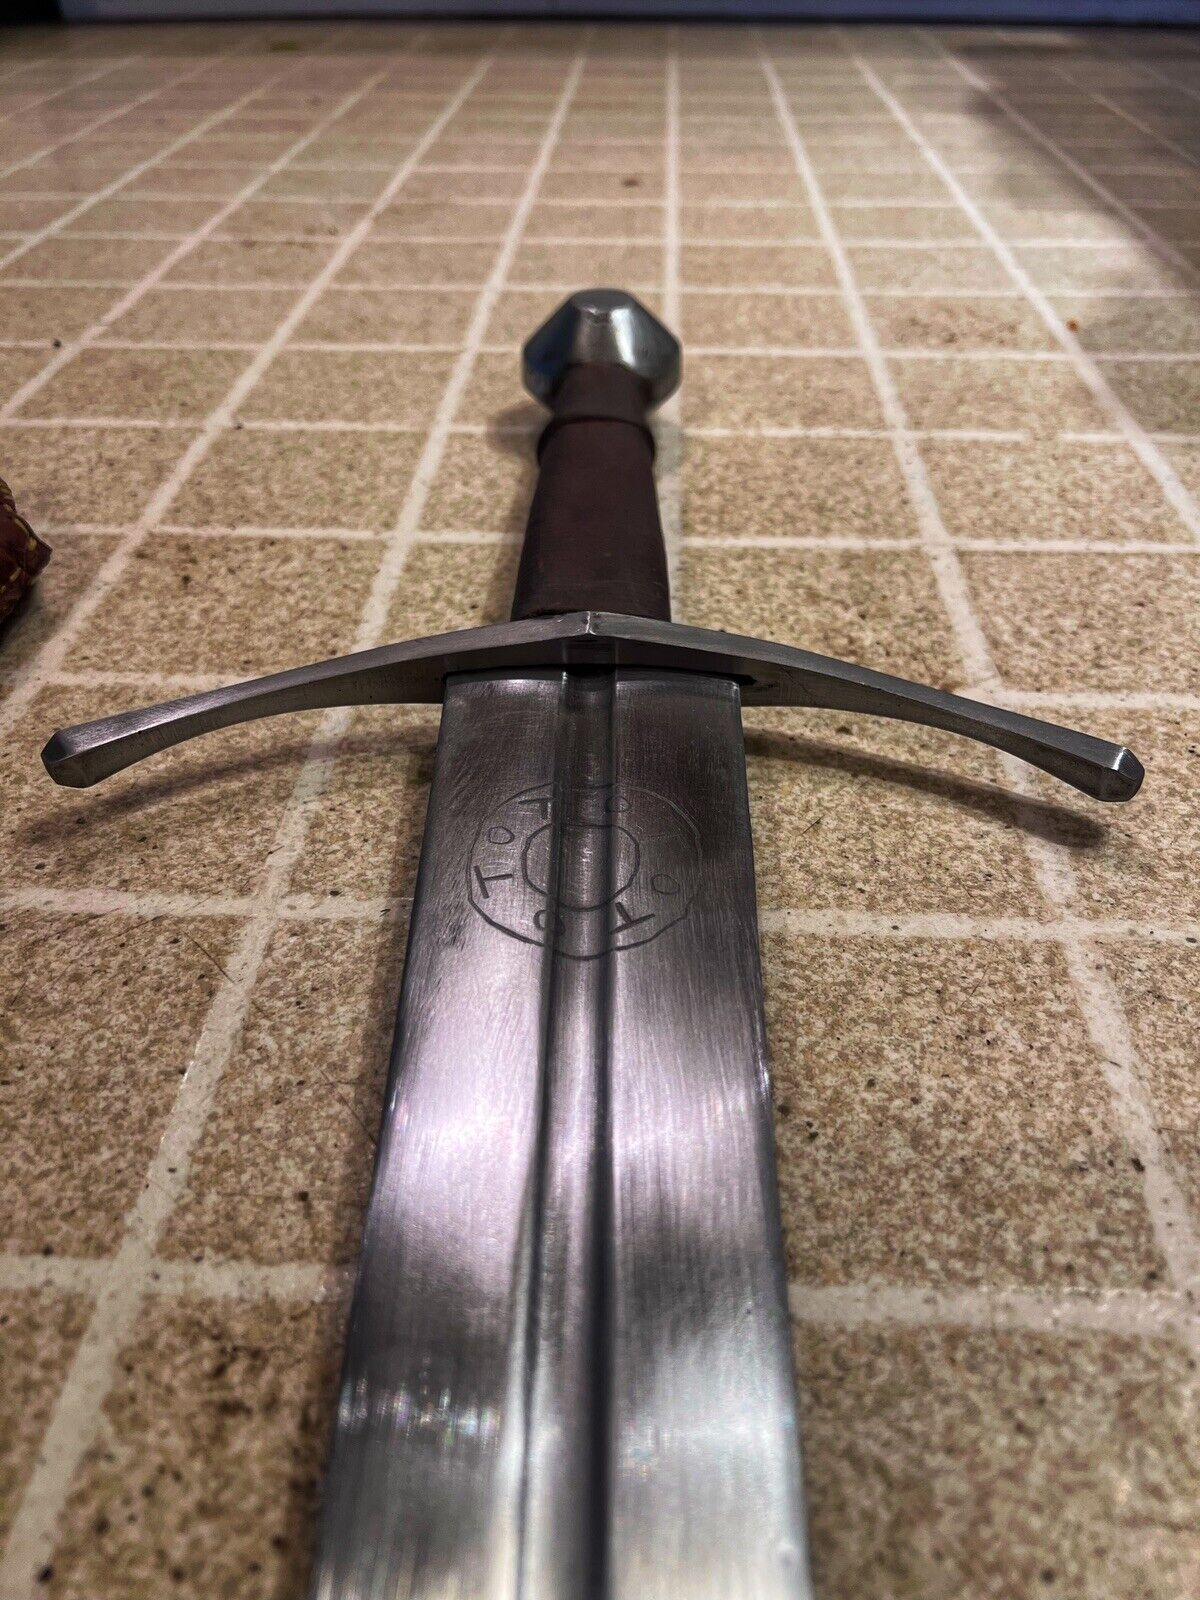 Unique Custom Arming Sword - Modified Prototype Model For A Well Known Maker